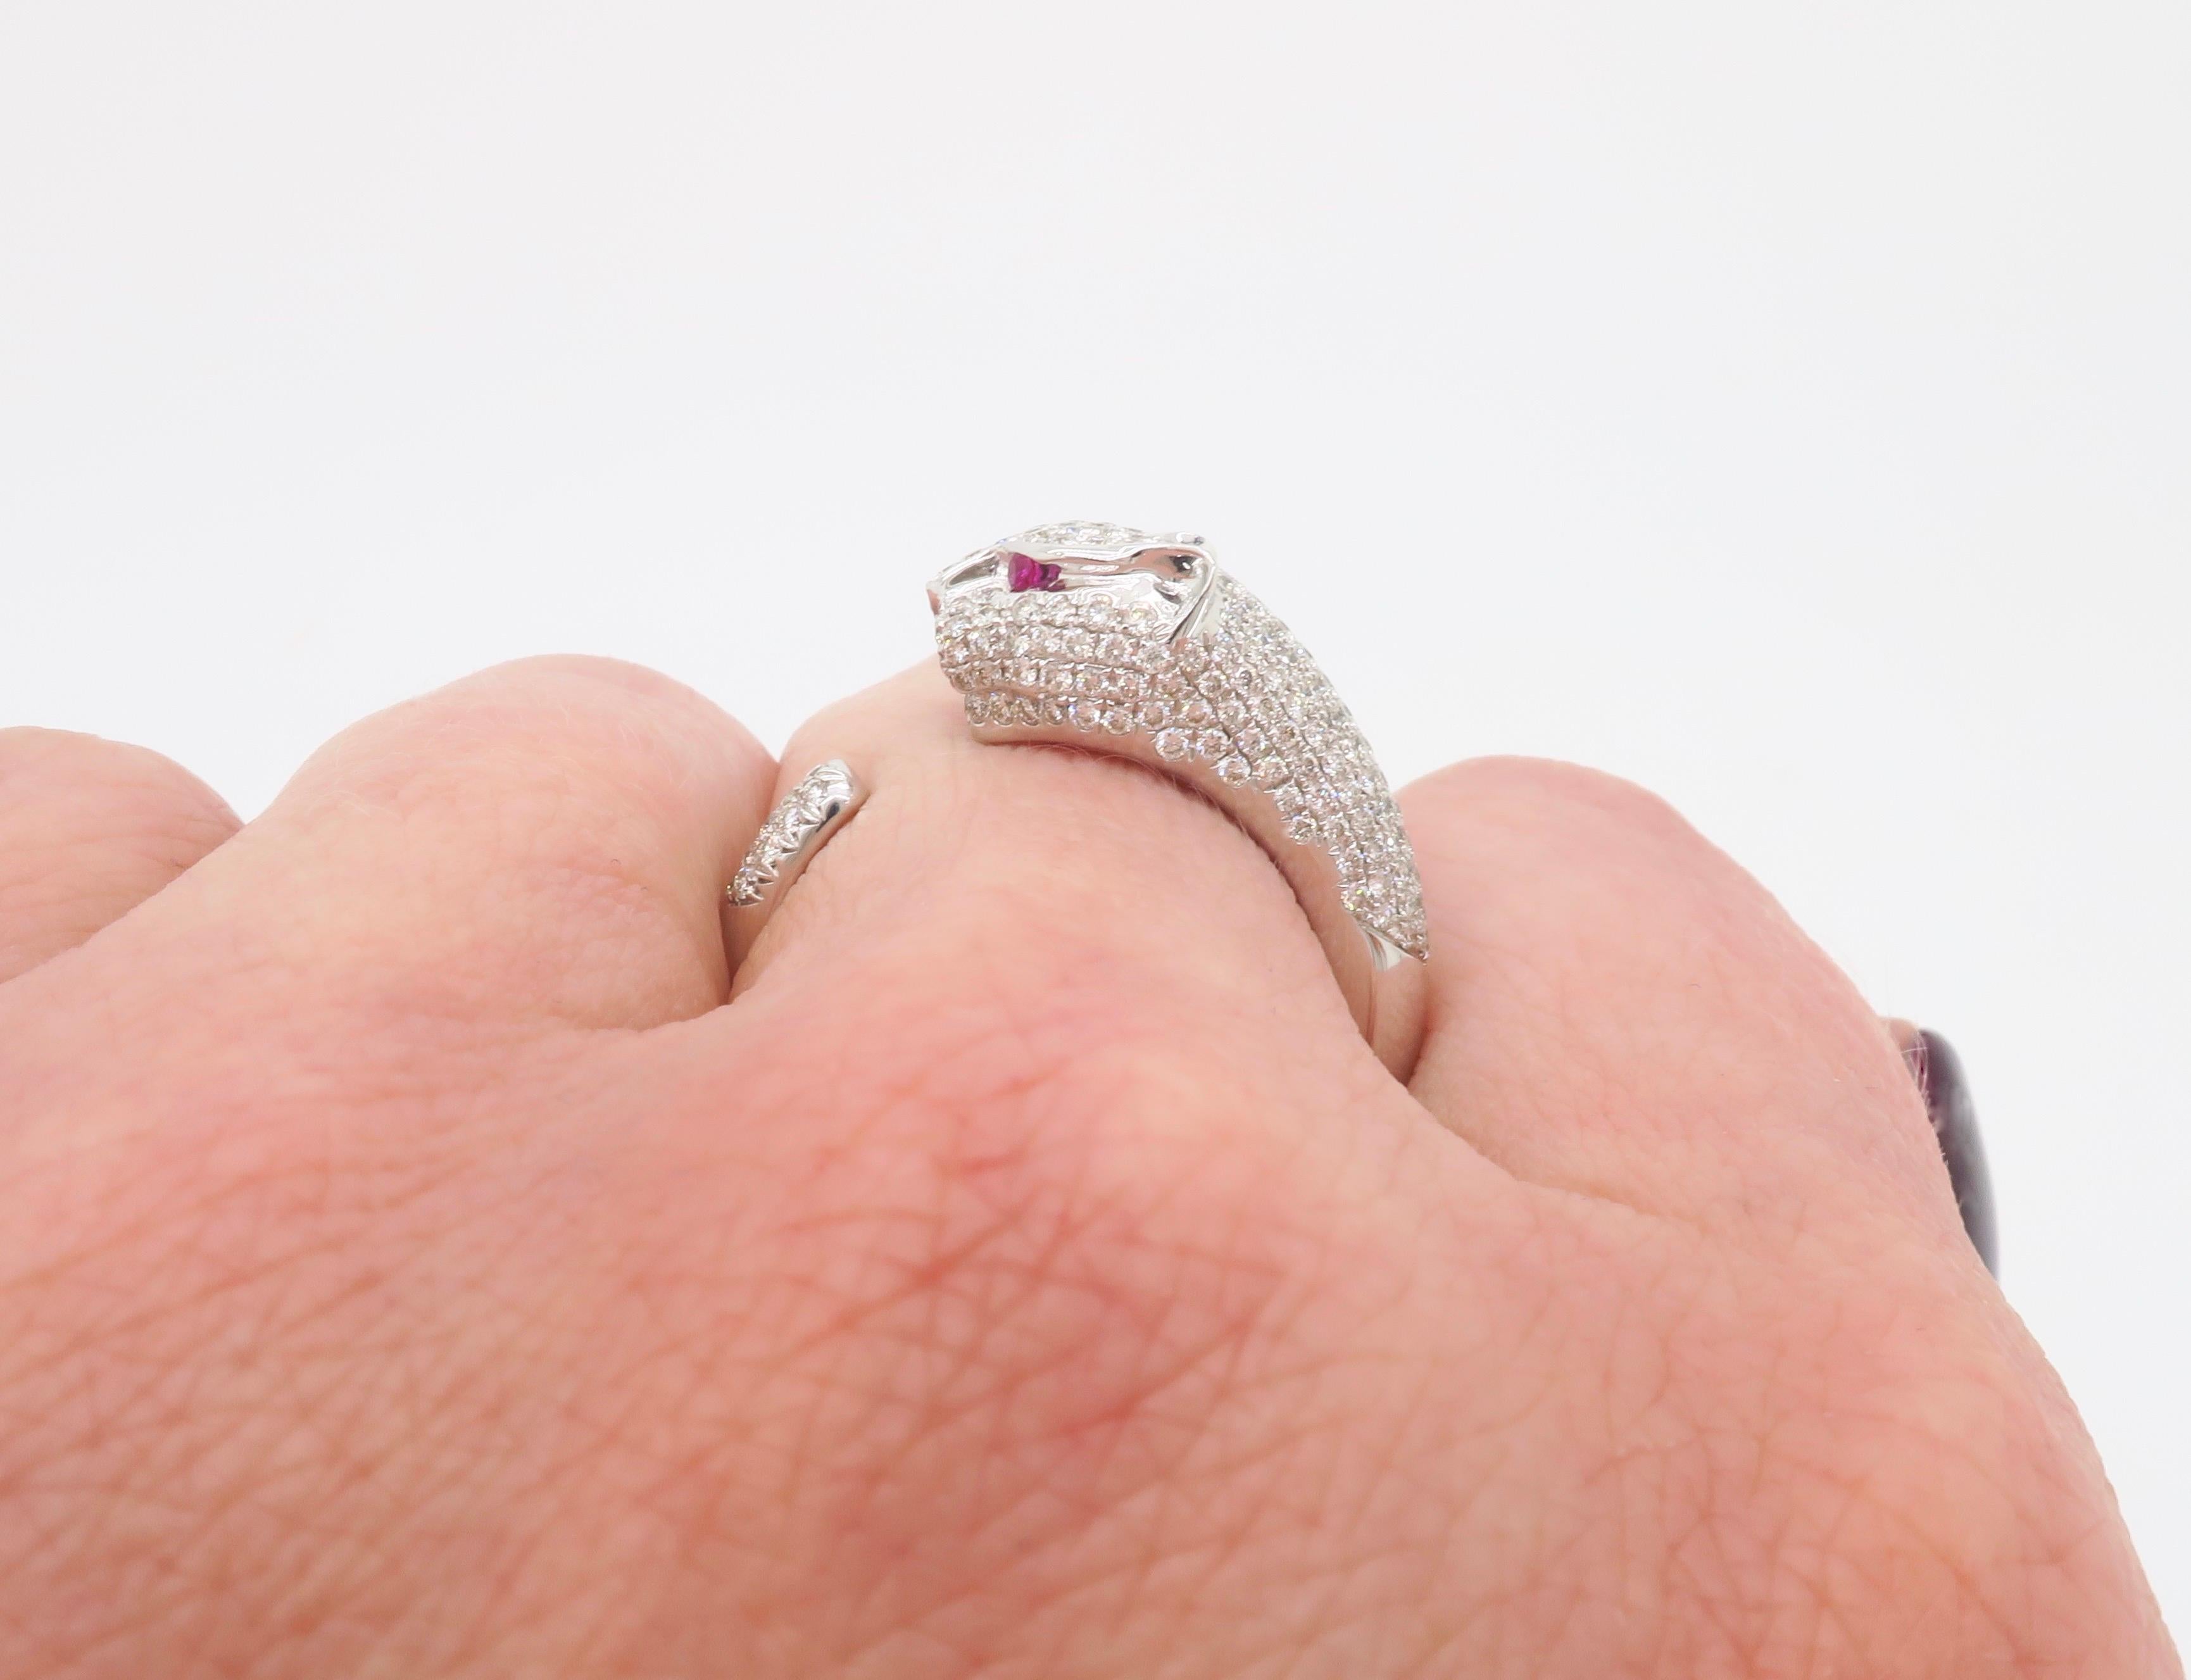 Panther Diamond and Ruby Ring Made in 18 Karat White Gold 8